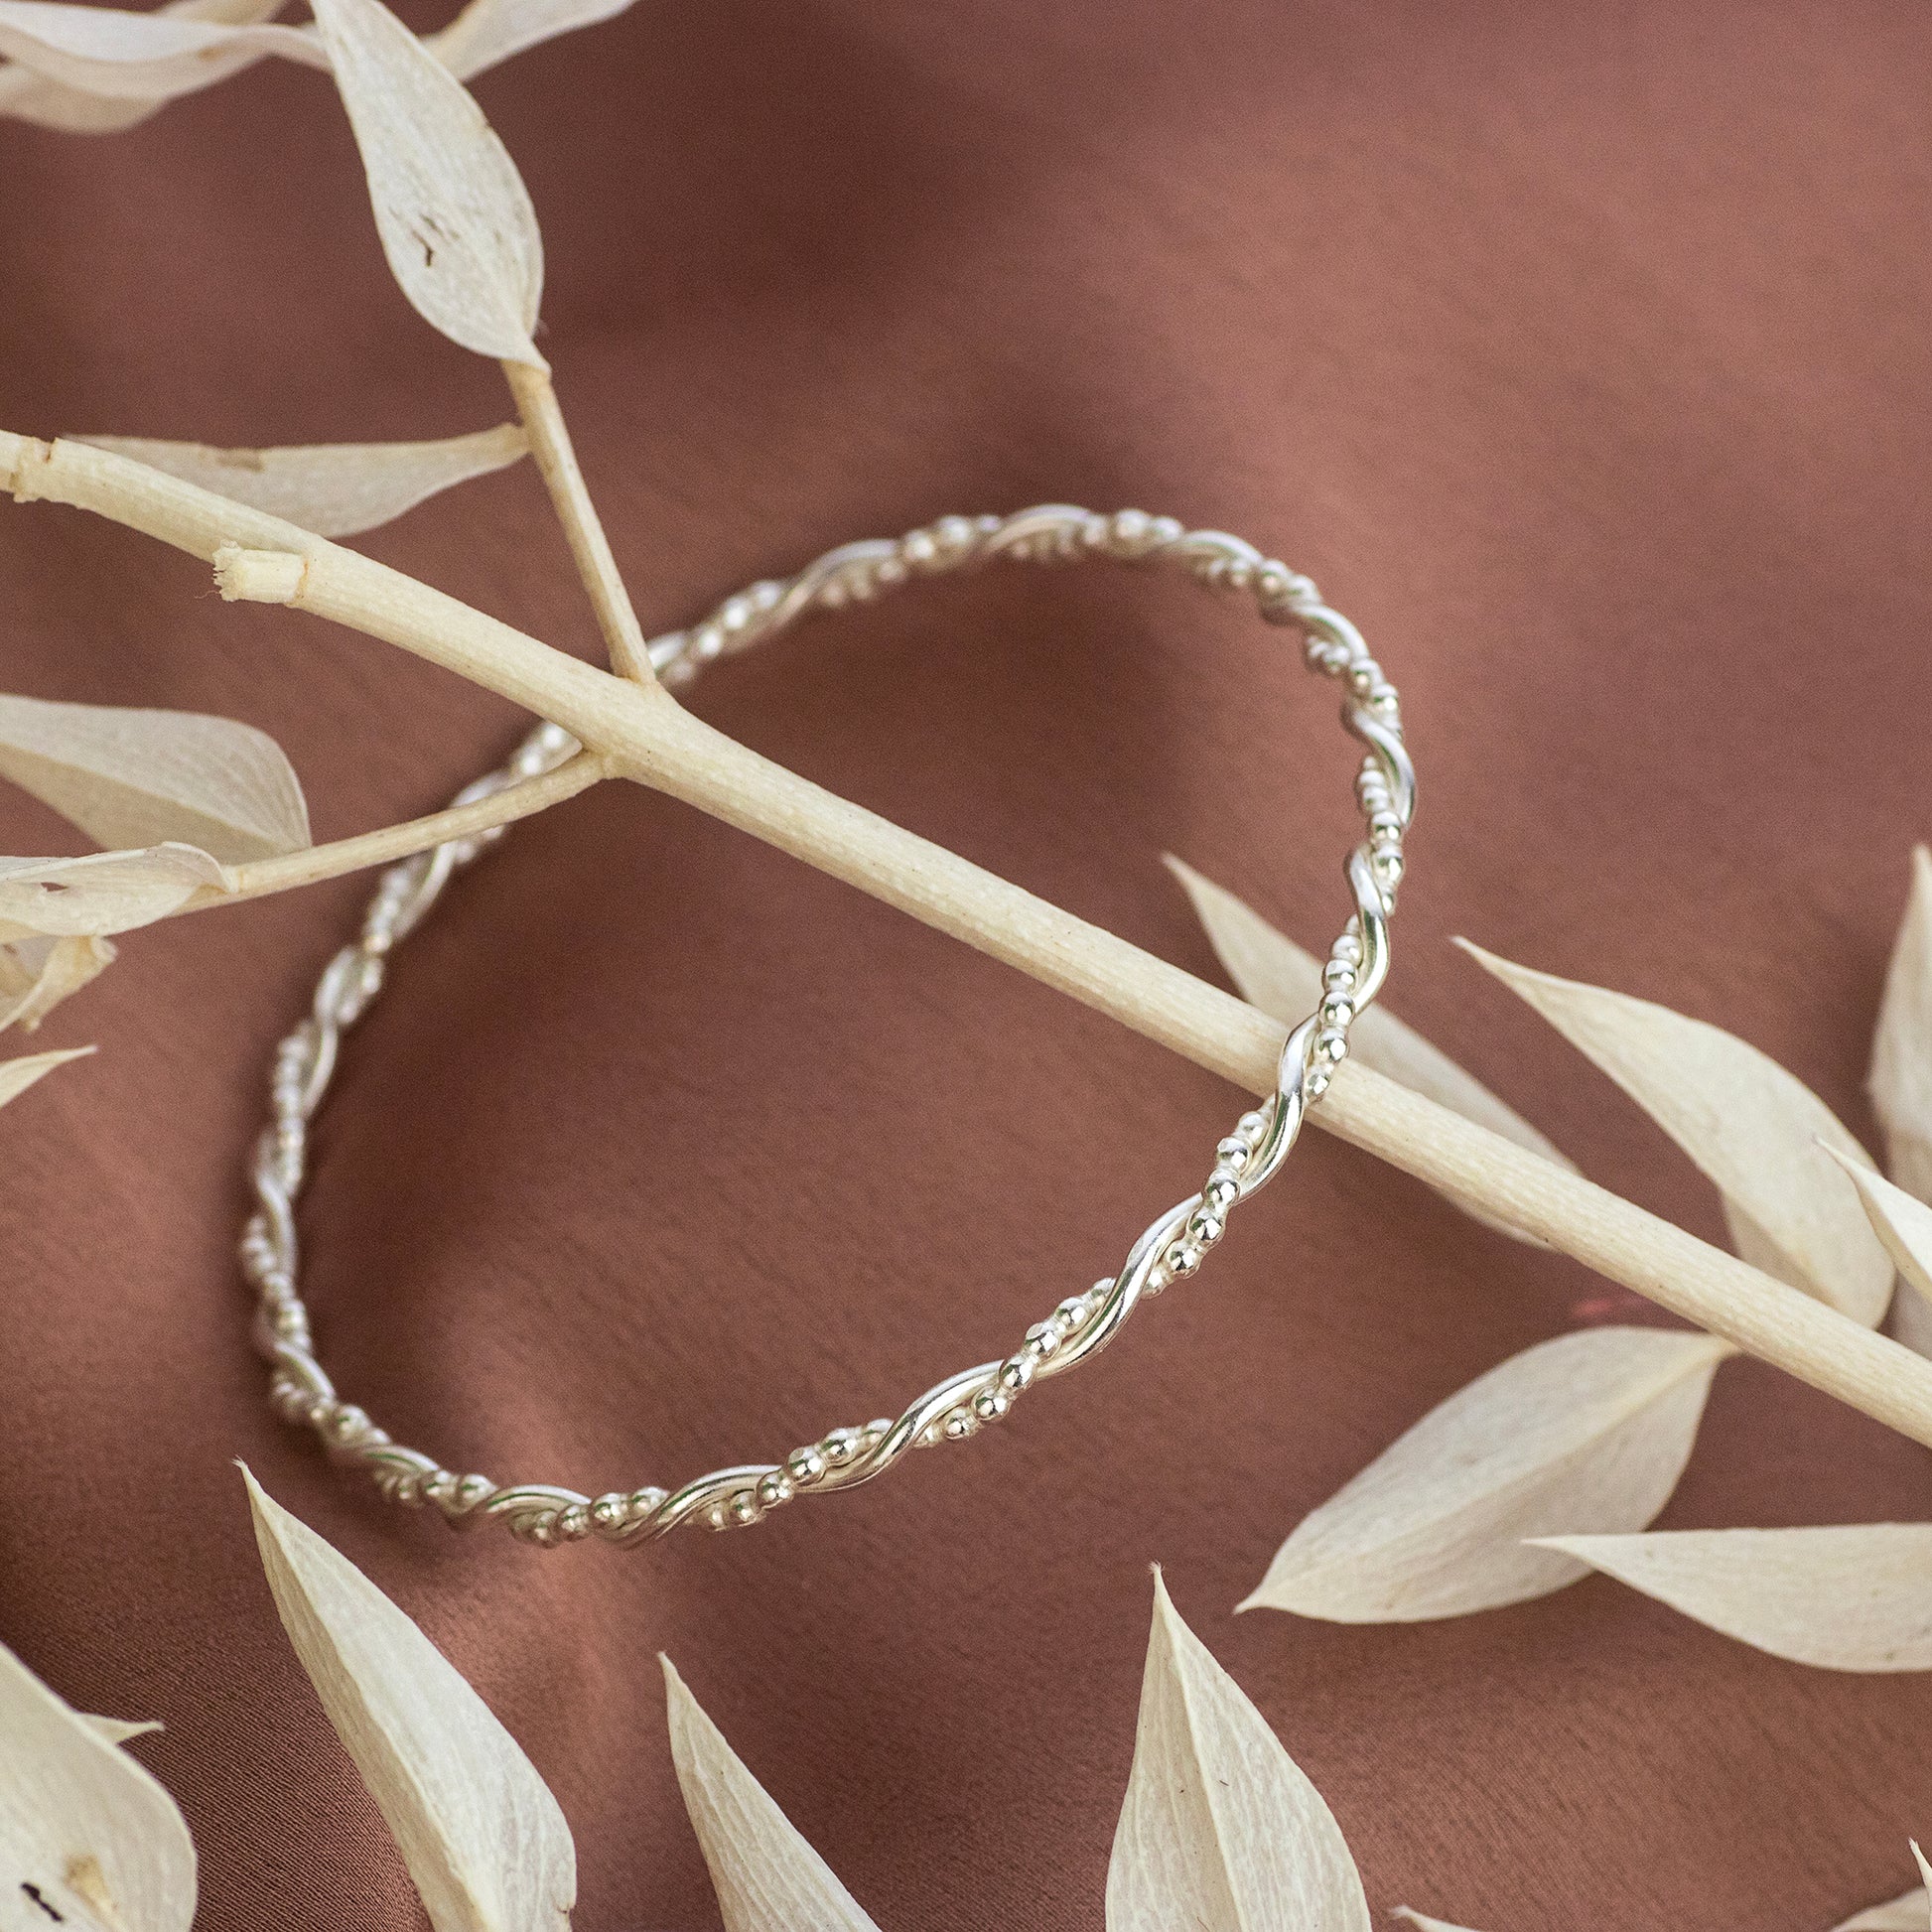 Entwined Bangle - Linked for a Lifetime